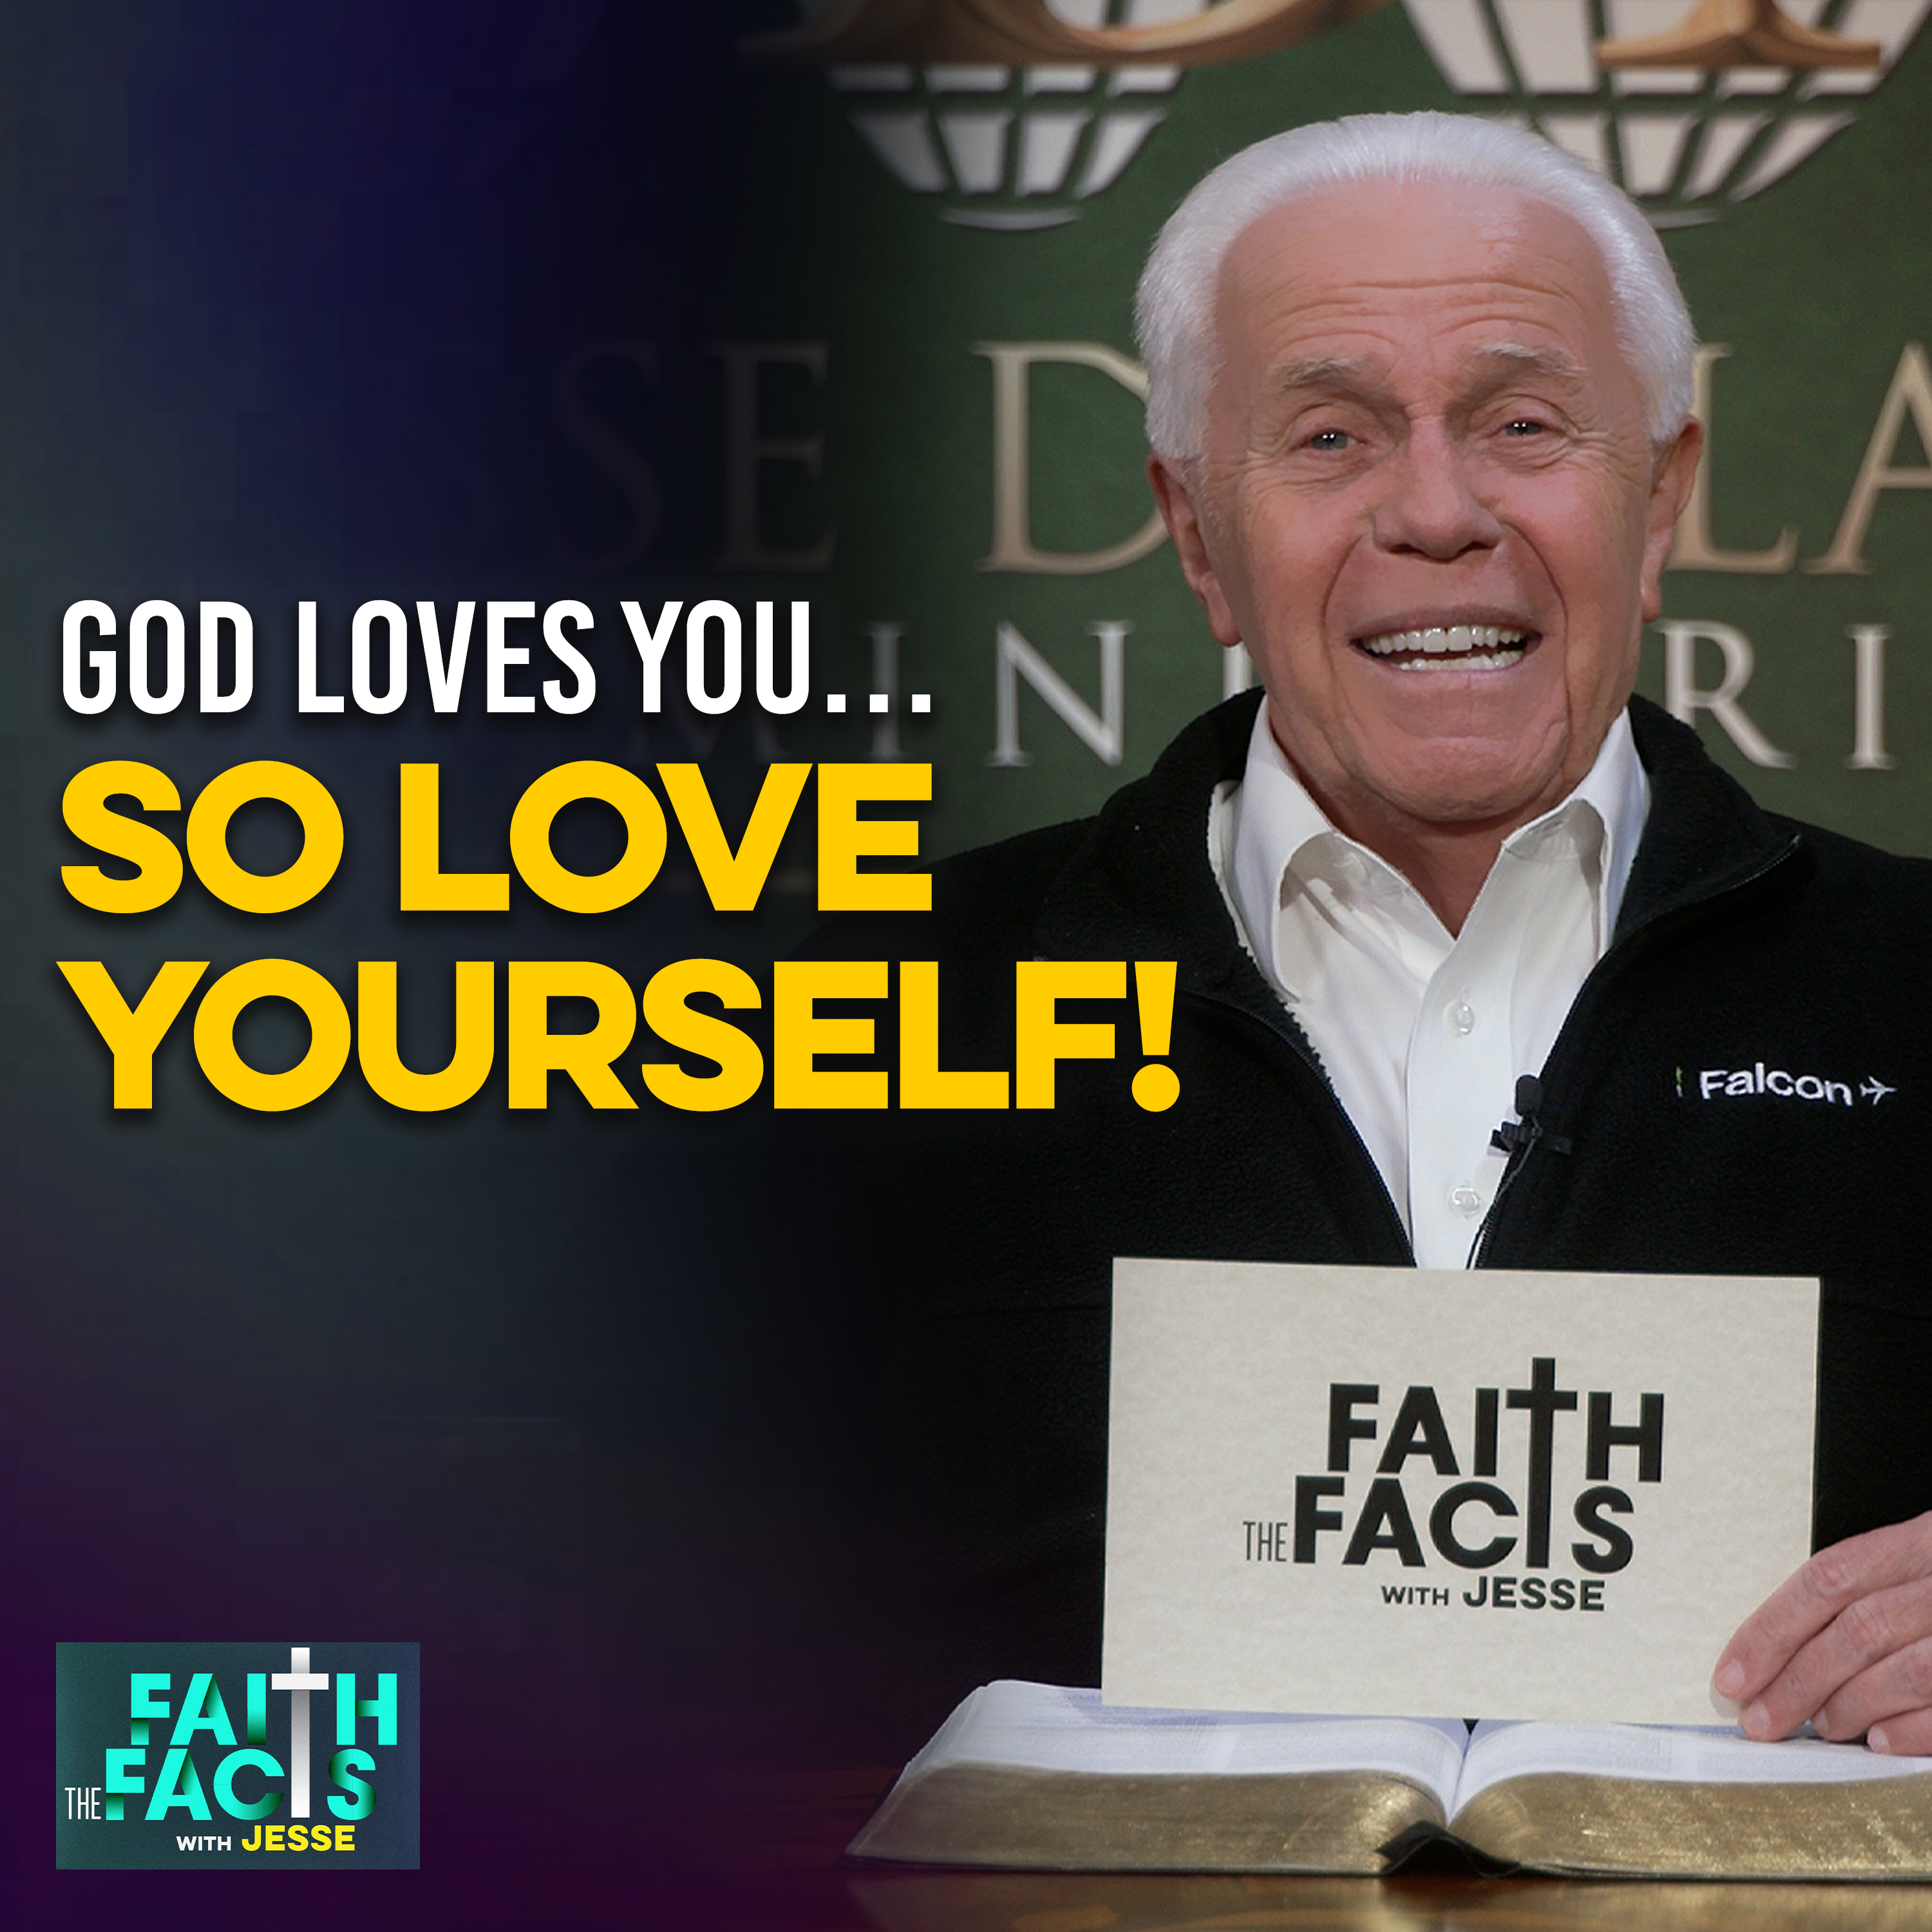 God Loves You…So Love Yourself!